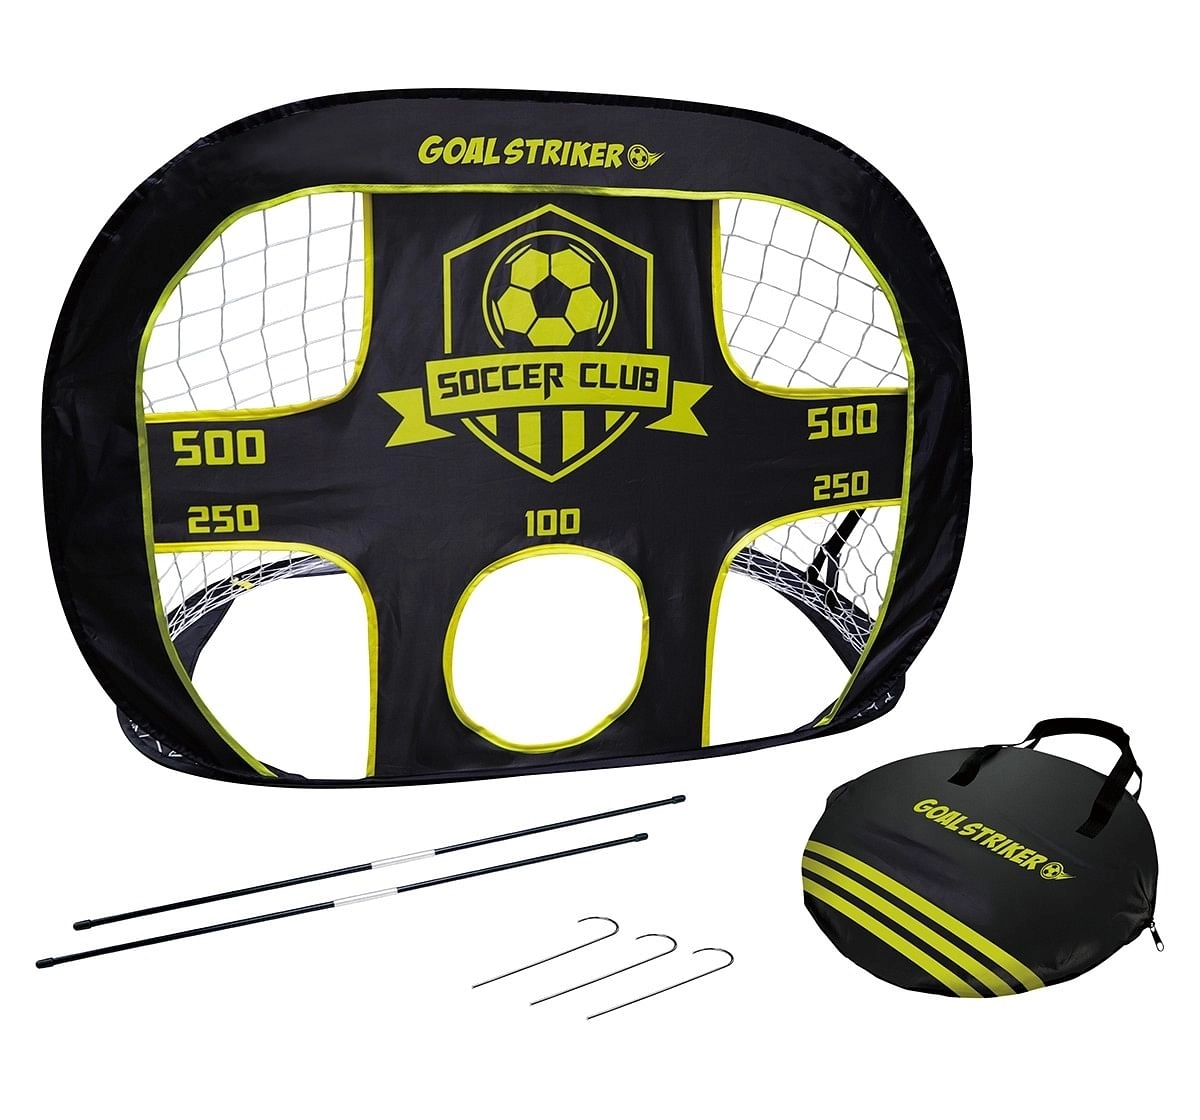 Hostfull 2-In-1 Pop-Up Goal With Target Outdoor Sports for Kids age 5Y+ 